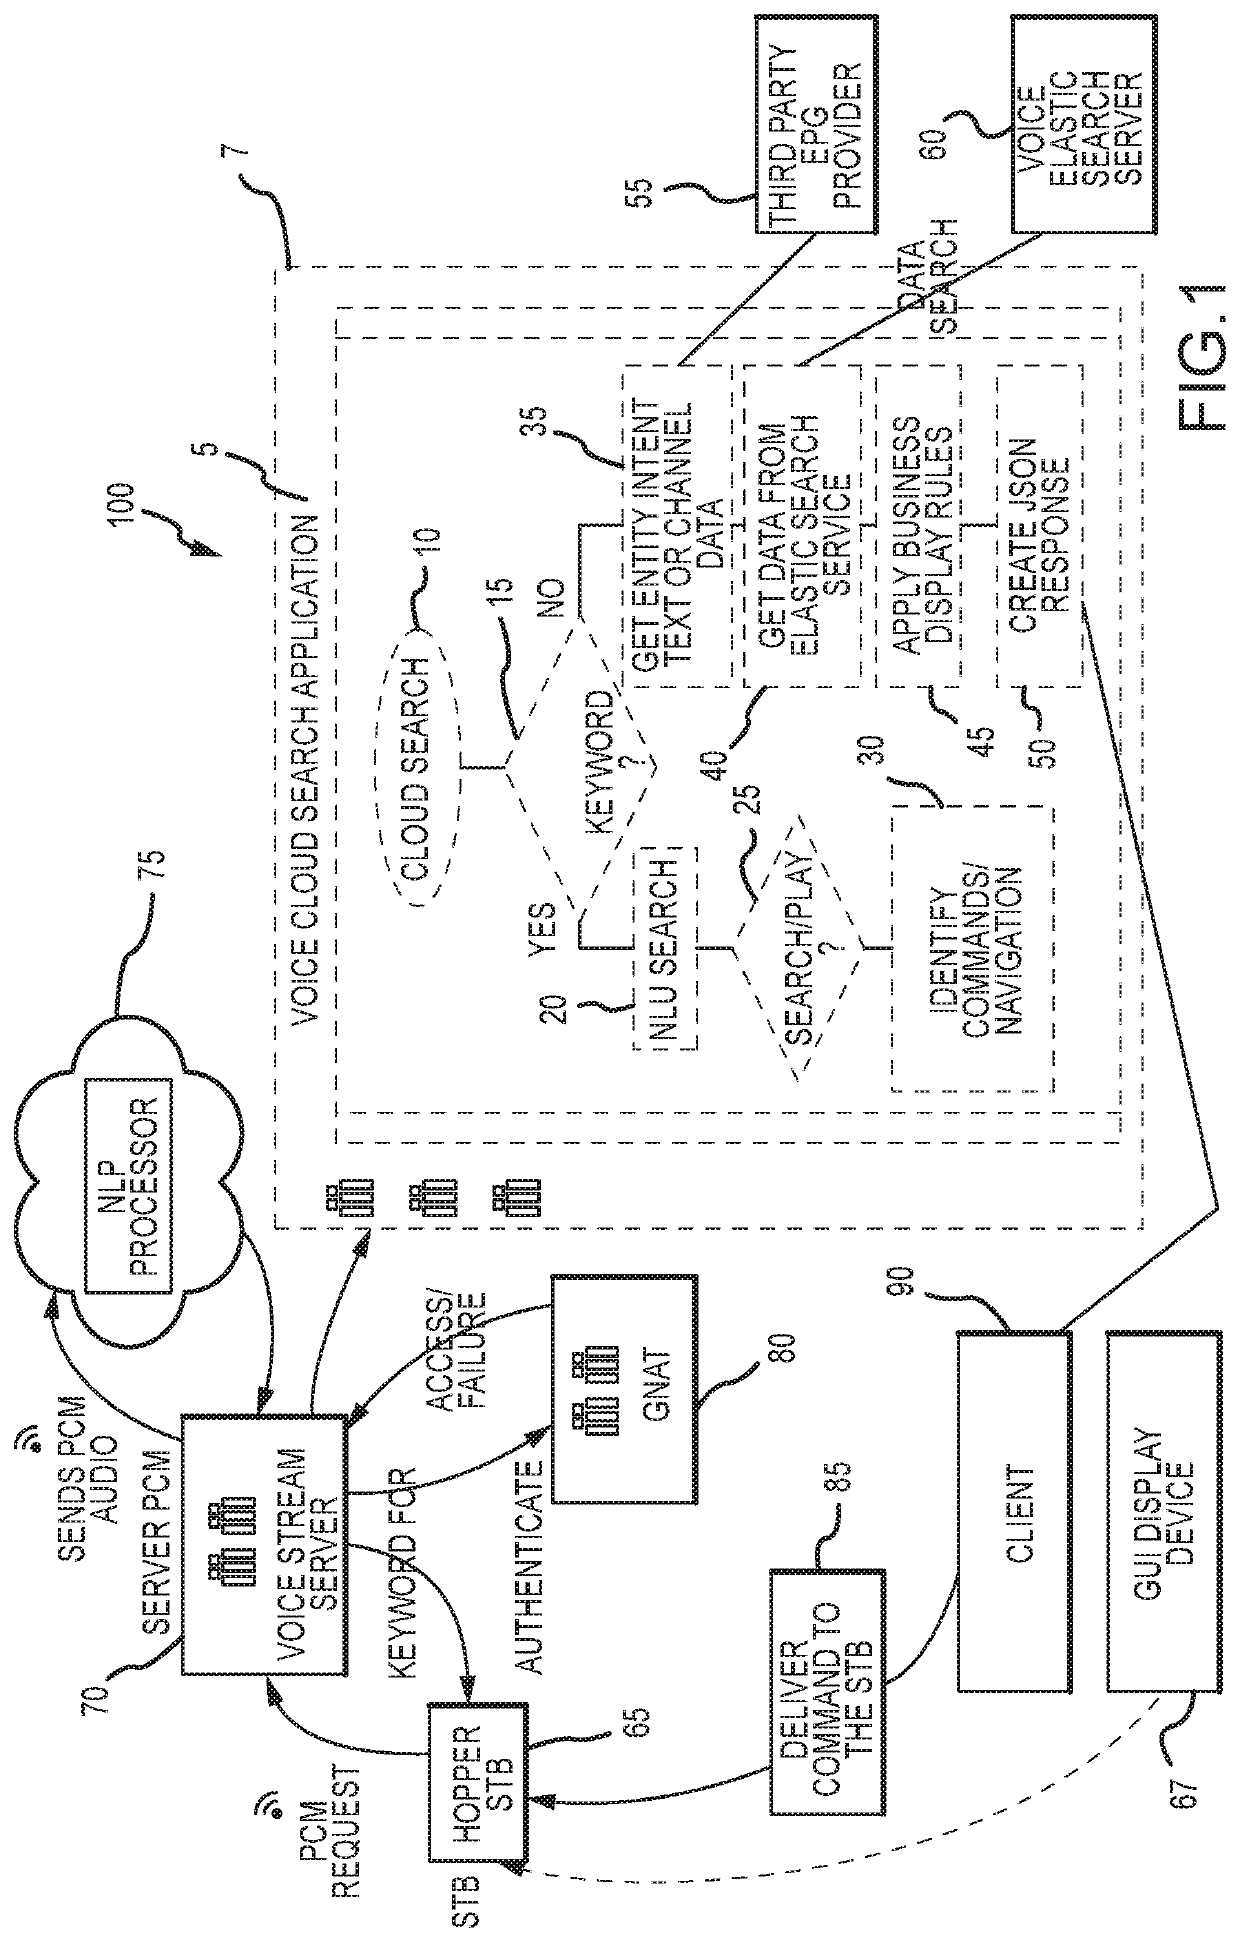 Method and system for implementing an elastic cloud-based voice search utilized by set-top box (STB) clients